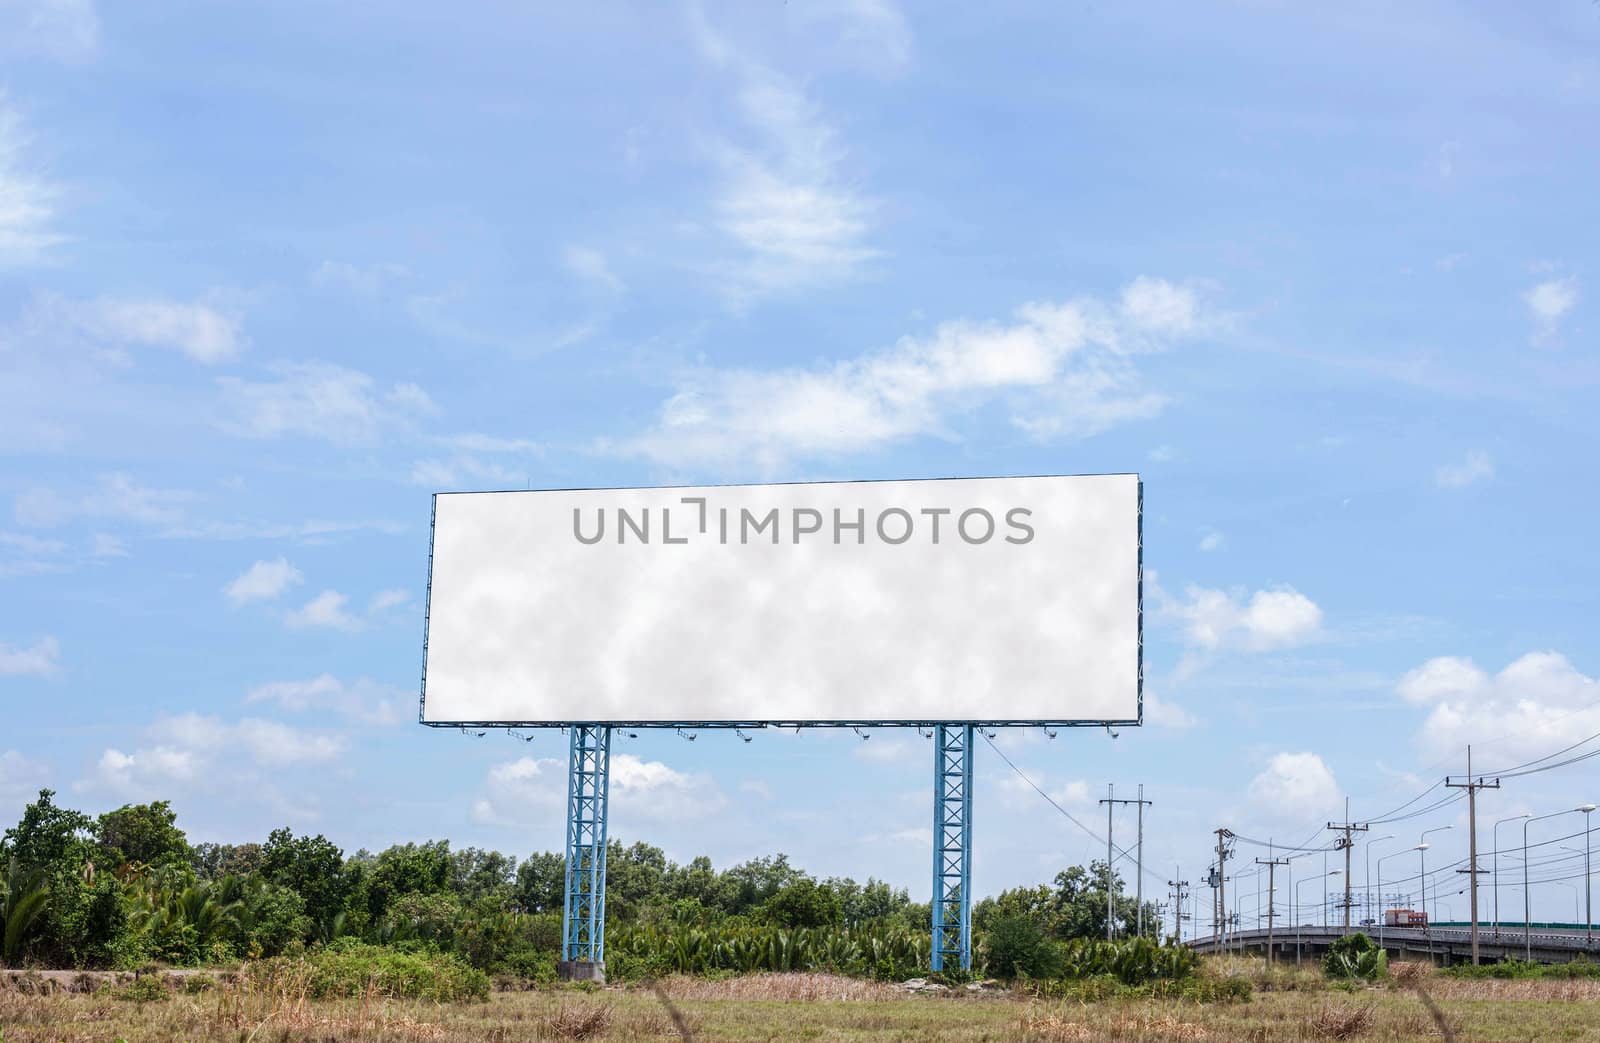 Large billboards. Located along the road.